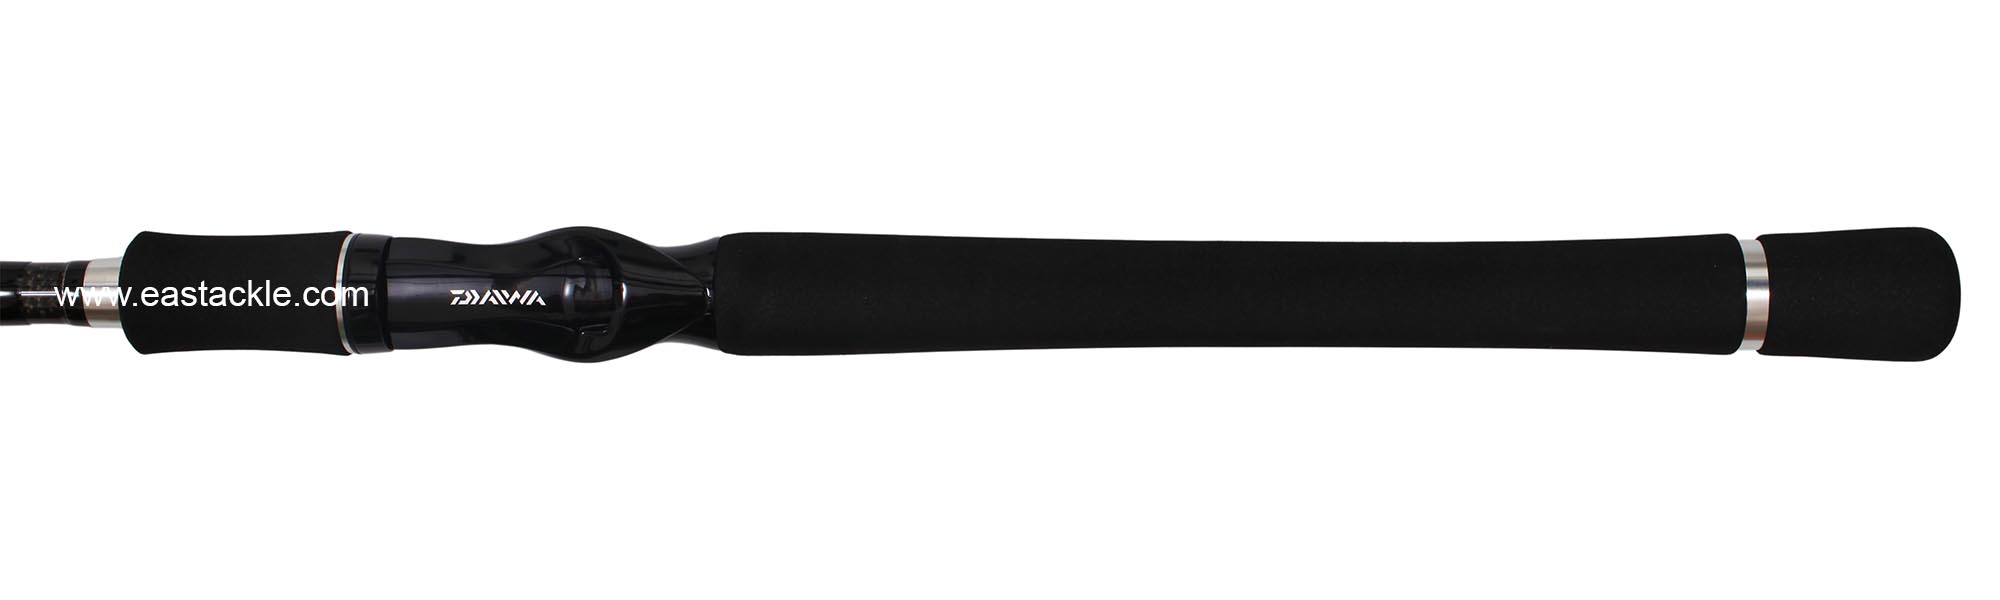 Daiwa - Black Label 701XXHB - Bait Casting Rod - Butt to Reel Seat (Top View) | Eastackle